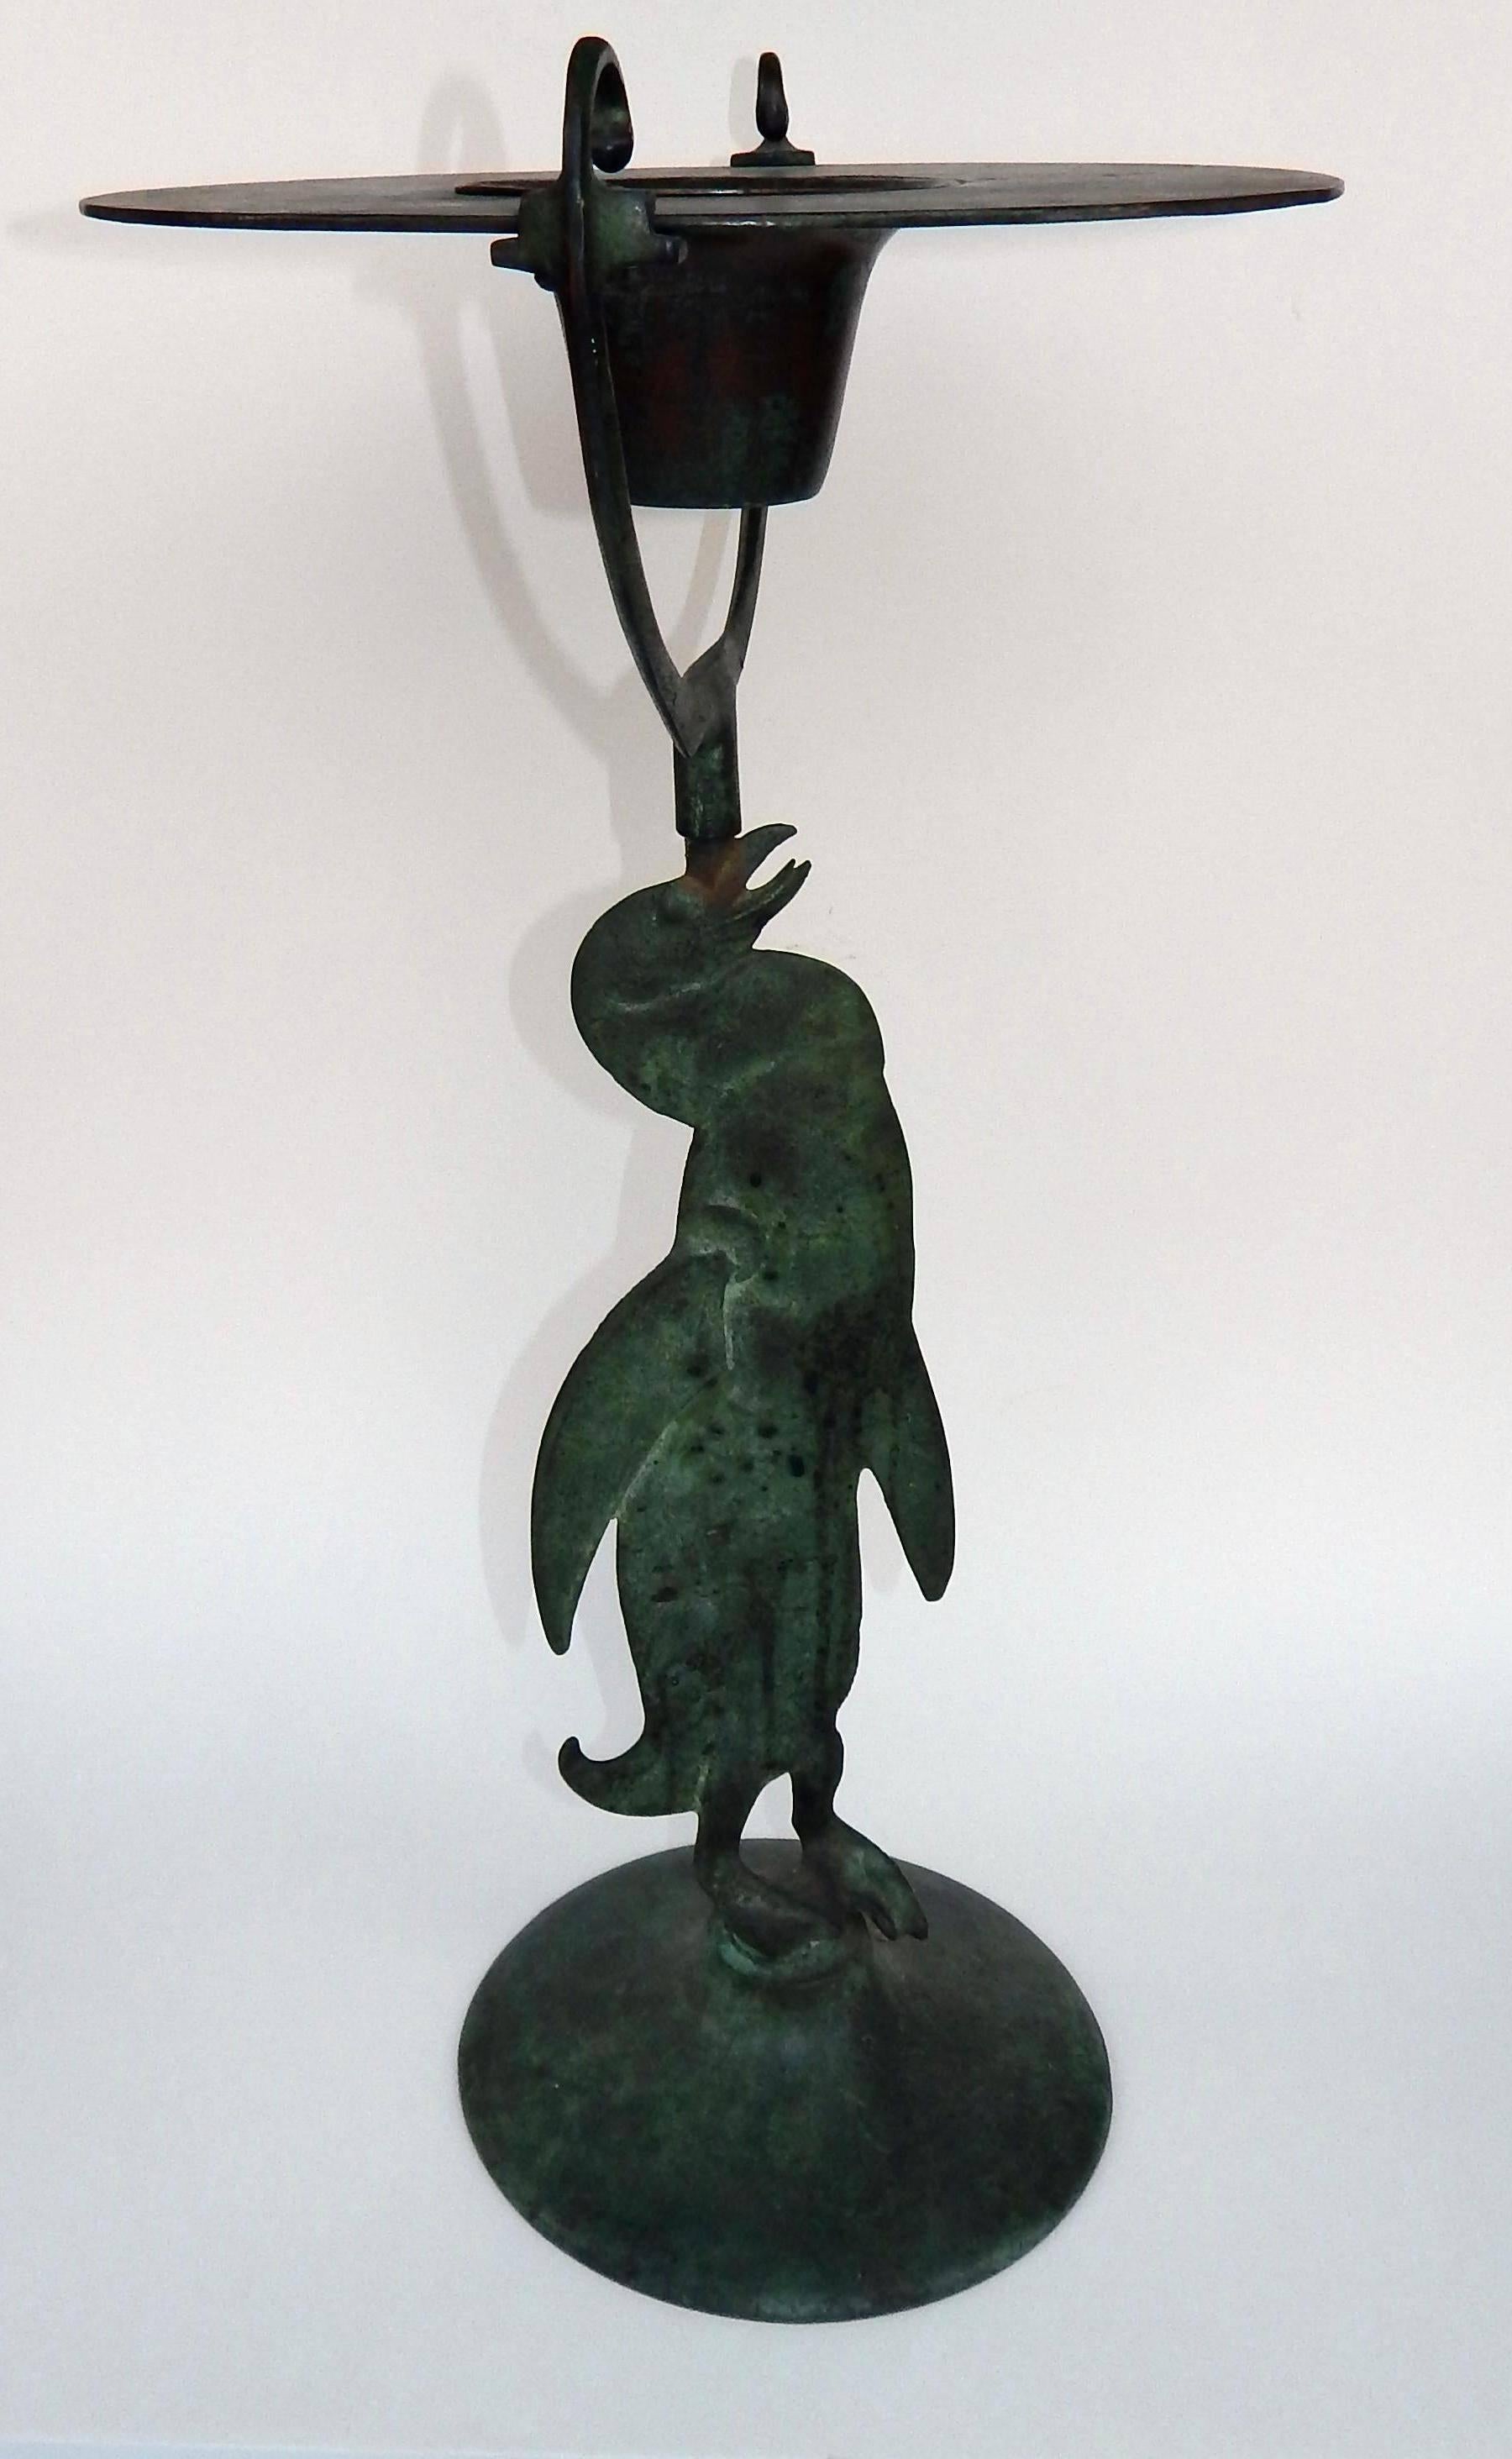 Fabulous deco penguin design- bronze cigar stand by Connecticut sculptor Robert Garret Thew, (1892-1964).
Signed on the base 